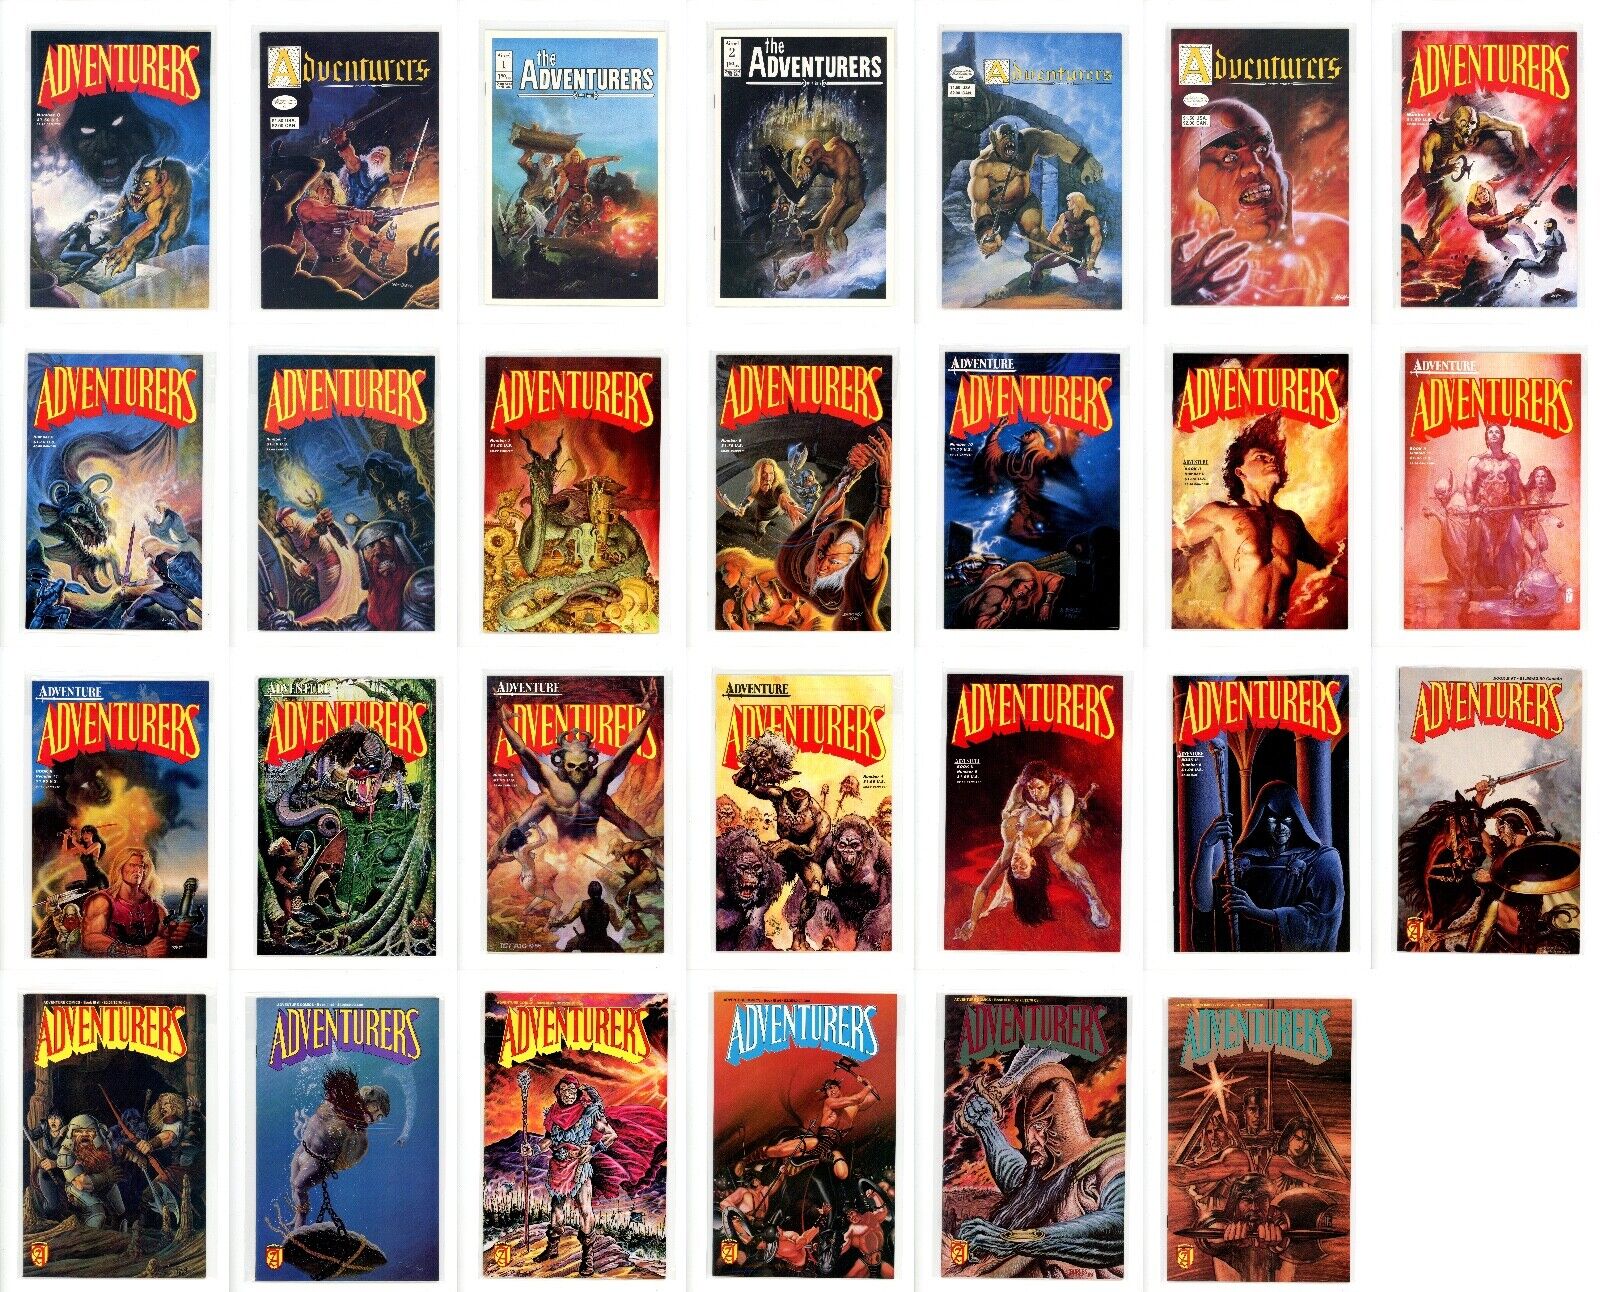 The Adventurers 1986 Aircel Comic Lot (27) Complete Series Run - Book 1,2,3